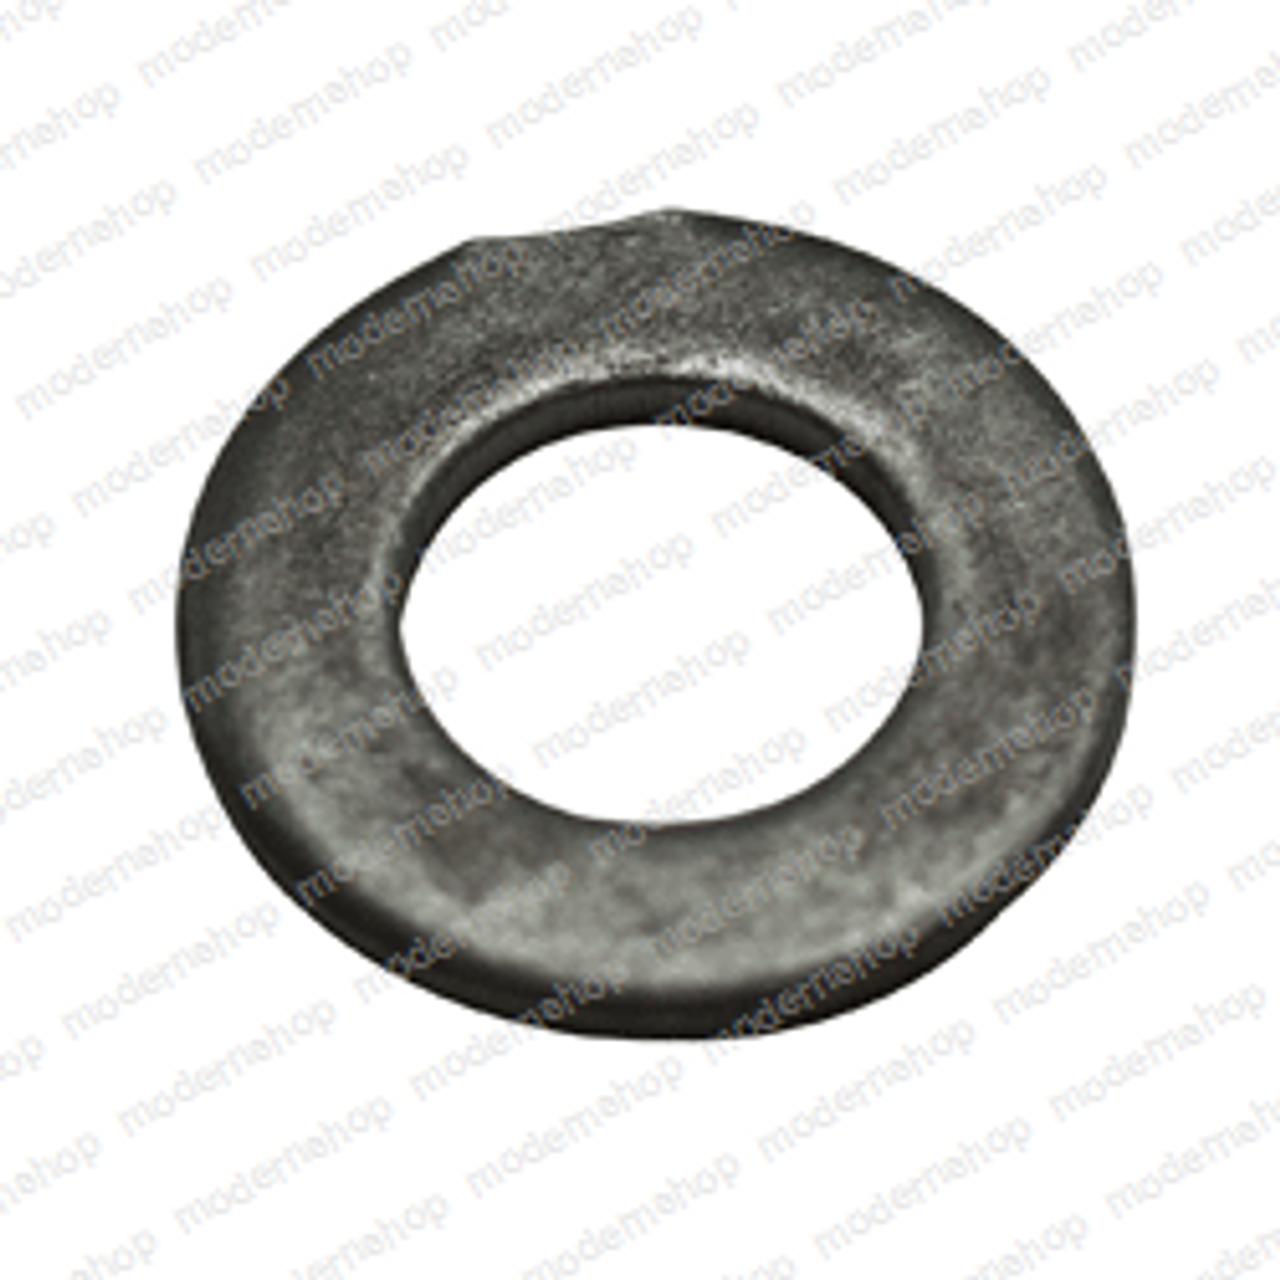 20882: Prime Mover Forklift WASHER - METRIC 14MM FLAT